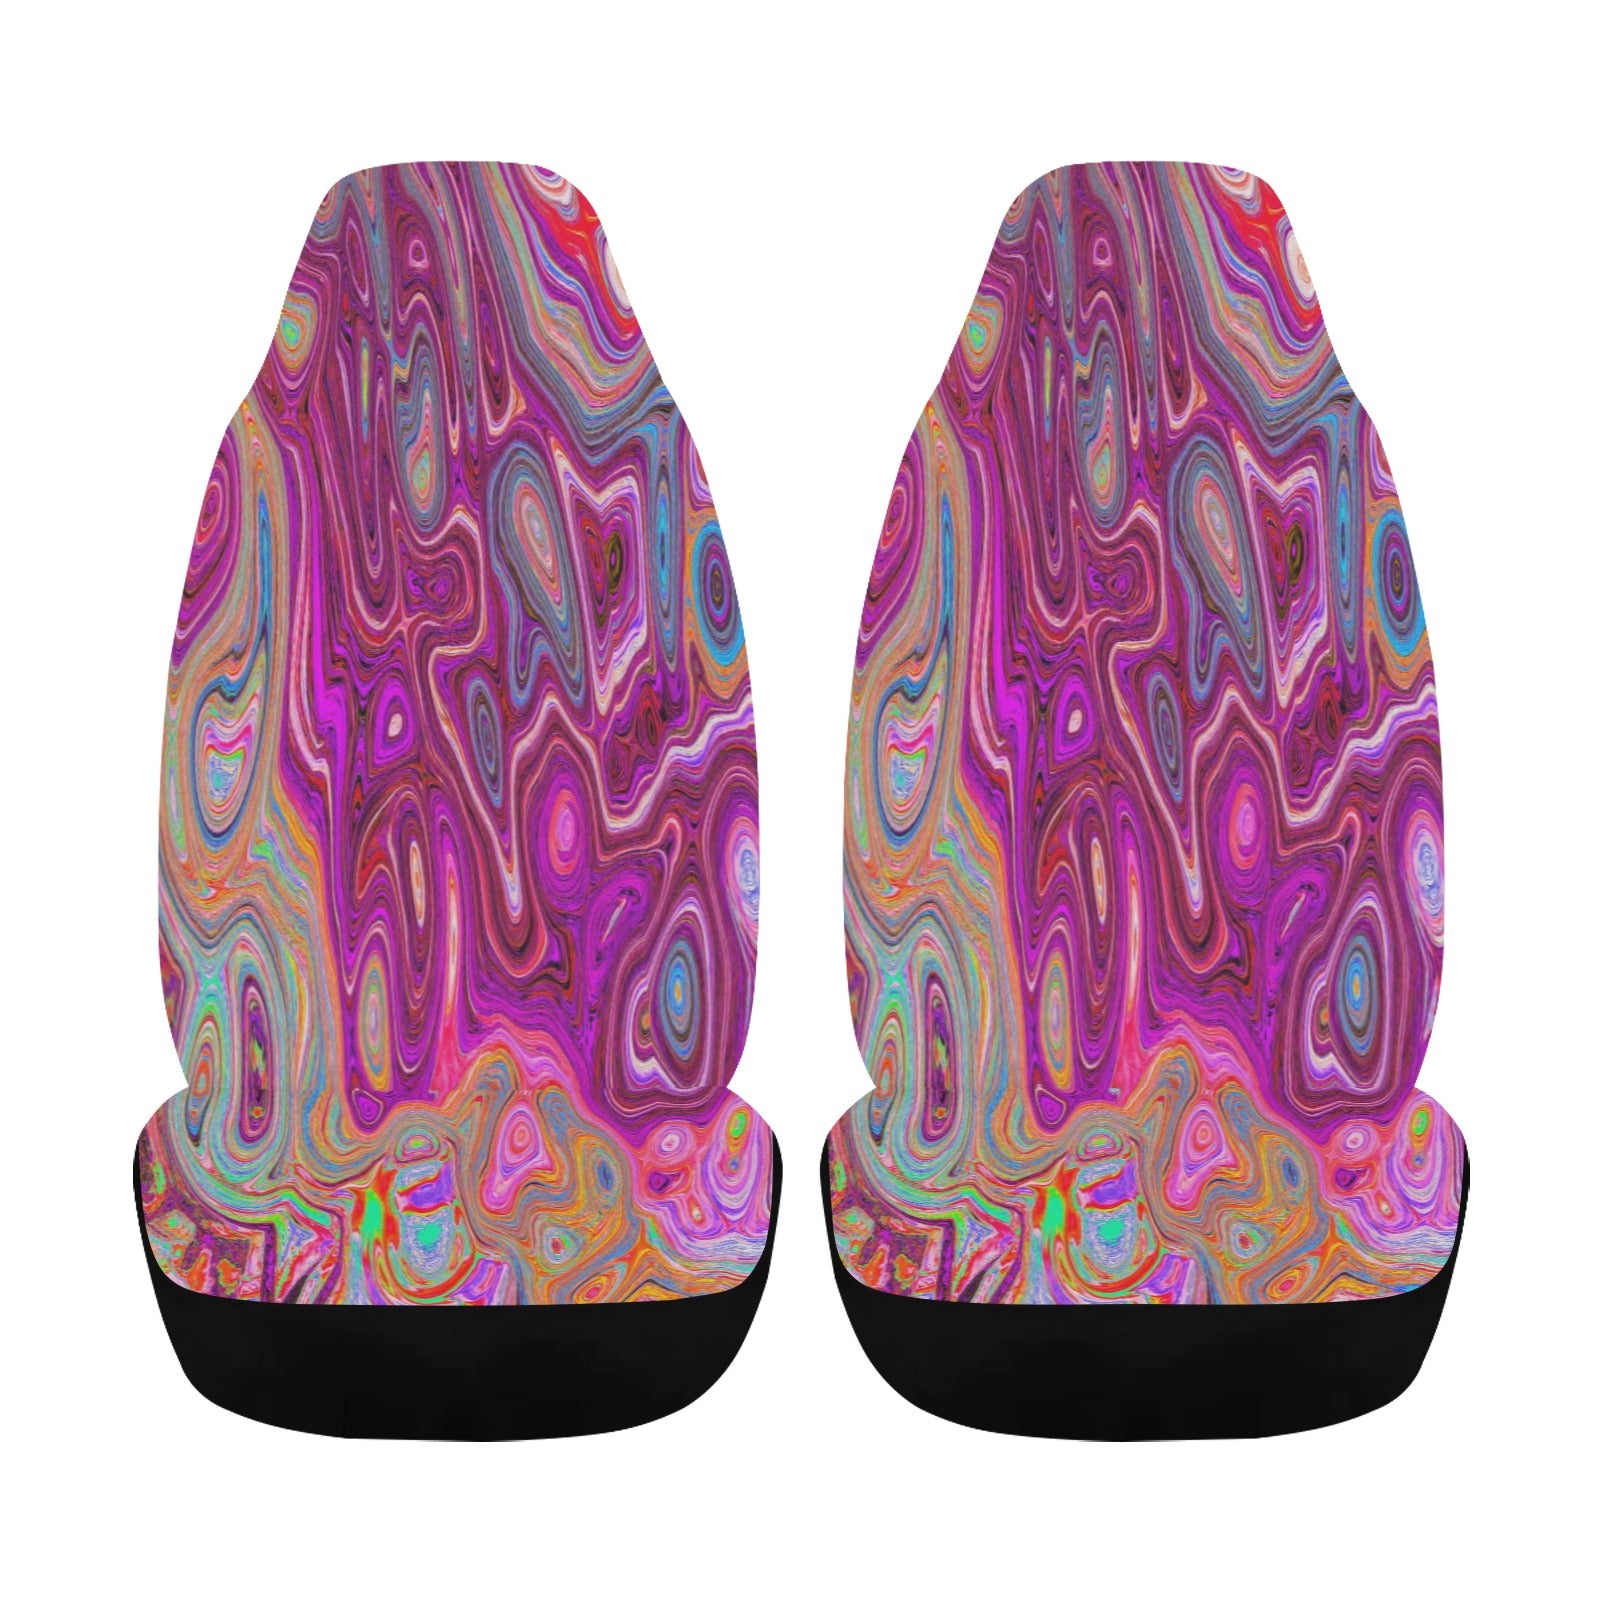 Car Seat Covers, Trippy Abstract Cool Magenta Rainbow Colors Retro Art